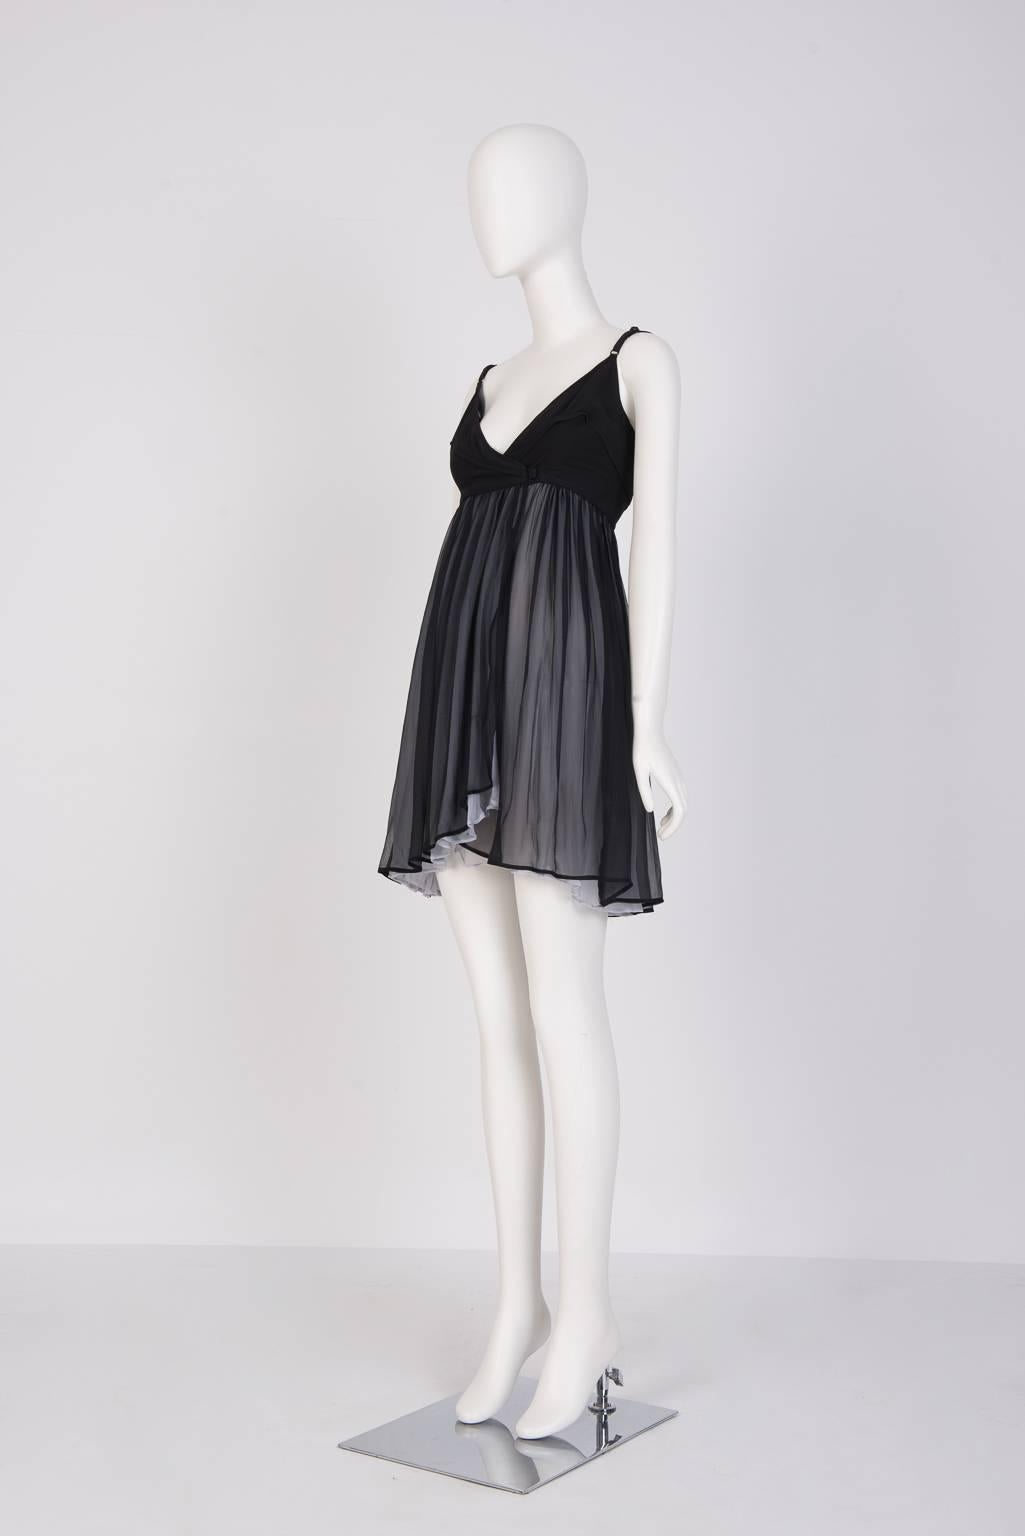 Double layered chiffon sundress with a contrast black bodice in plunging V-Neck cut. Very good condition with minor sign of tears on the inside layer of the dress. 